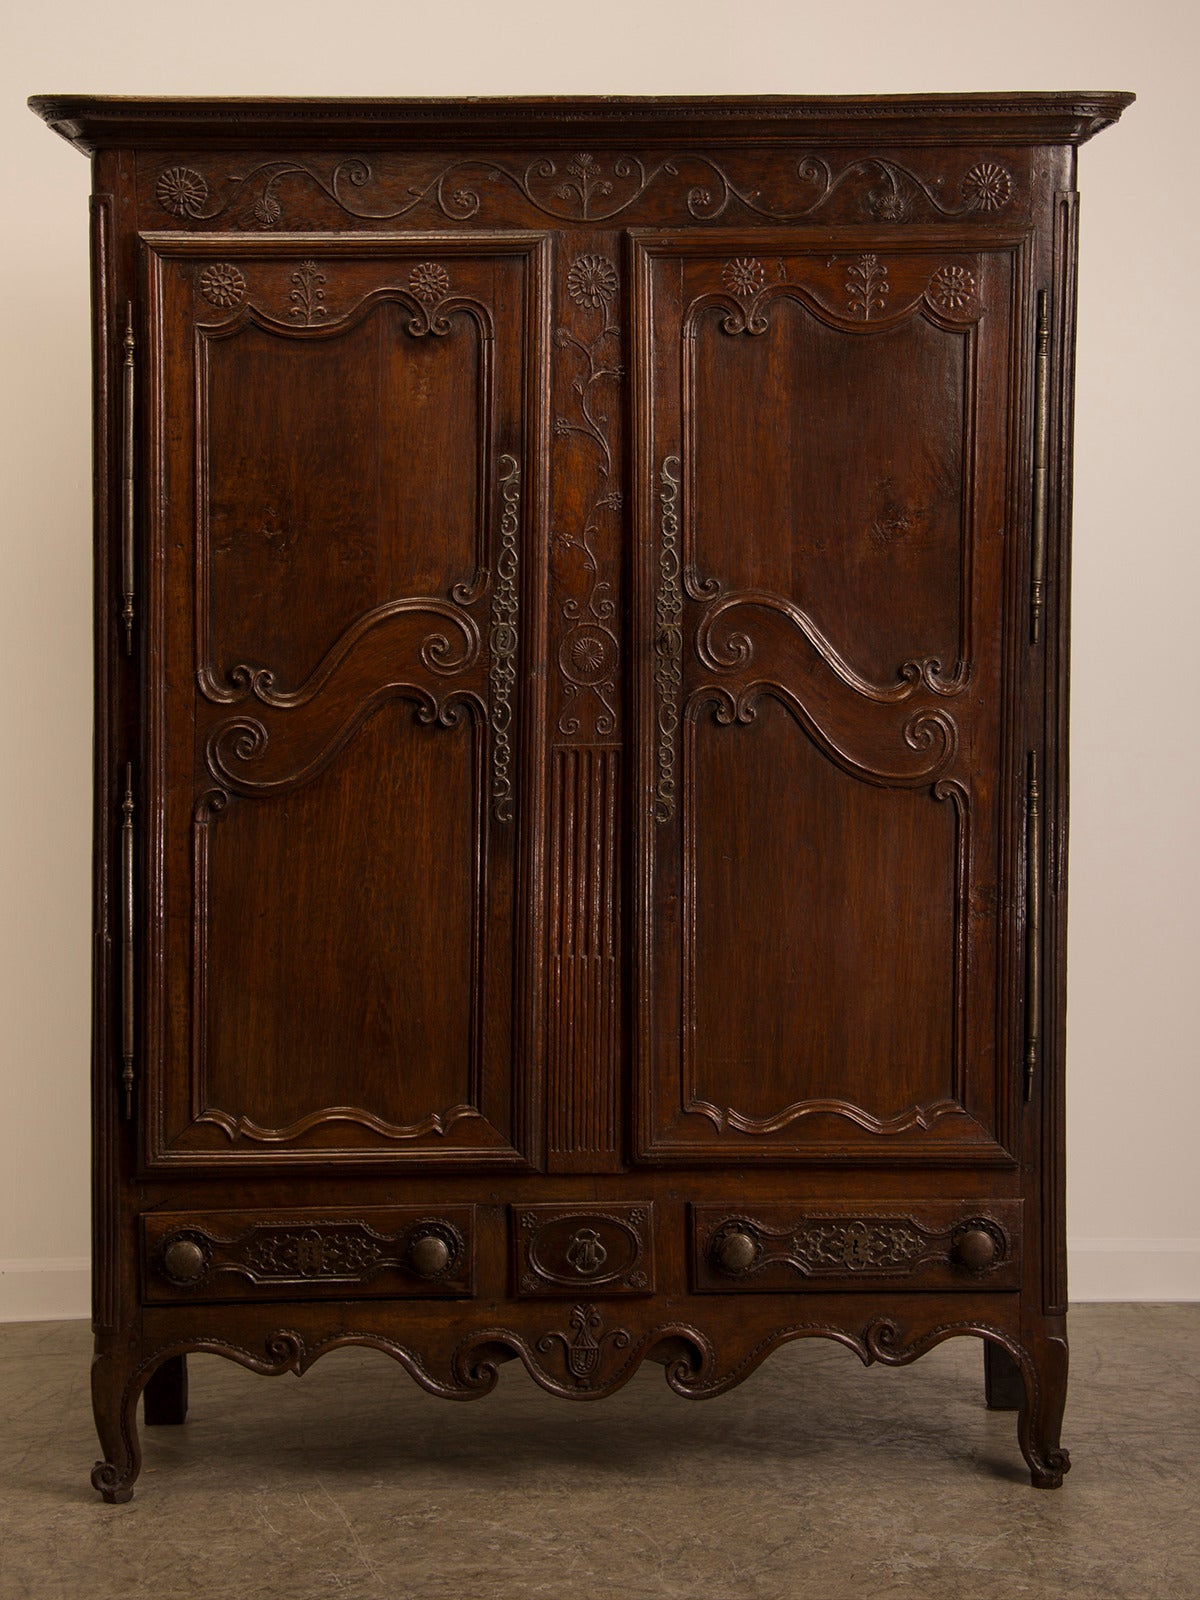 This hand carved antique French armoire showcases the superb cabinet making skills used during the eighteenth century. The overall symmetry and balance of the scrolls and flourishes delight the eye as it moves across the surface. The depth of the